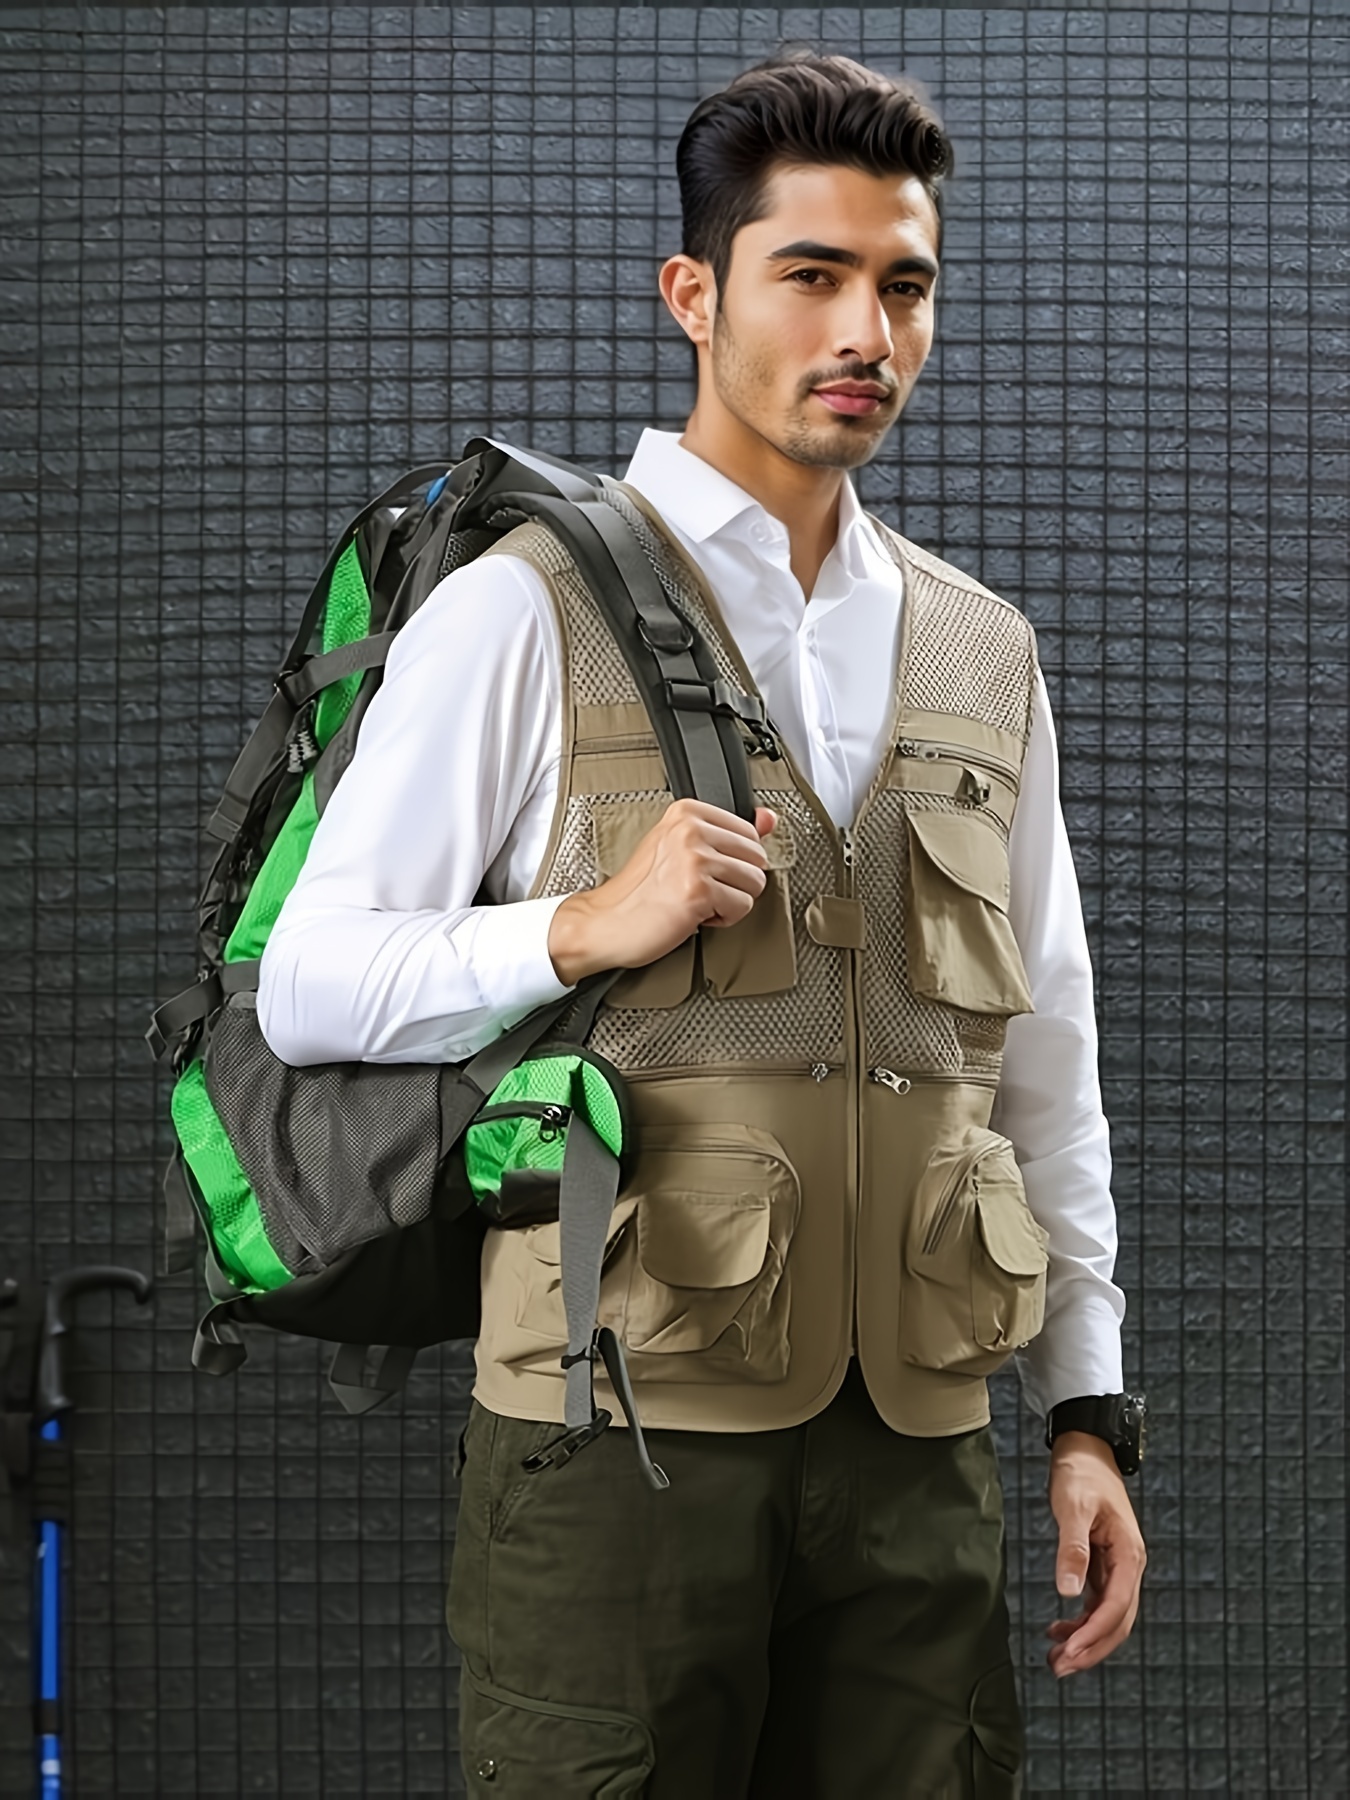 TMOYZQ Men's Outdoor Fishing Vest Casual Work Mesh Lined Vests Breathable  Waterproof Travel Photo Cargo Vest Jacket with Multi Pockets, Available in